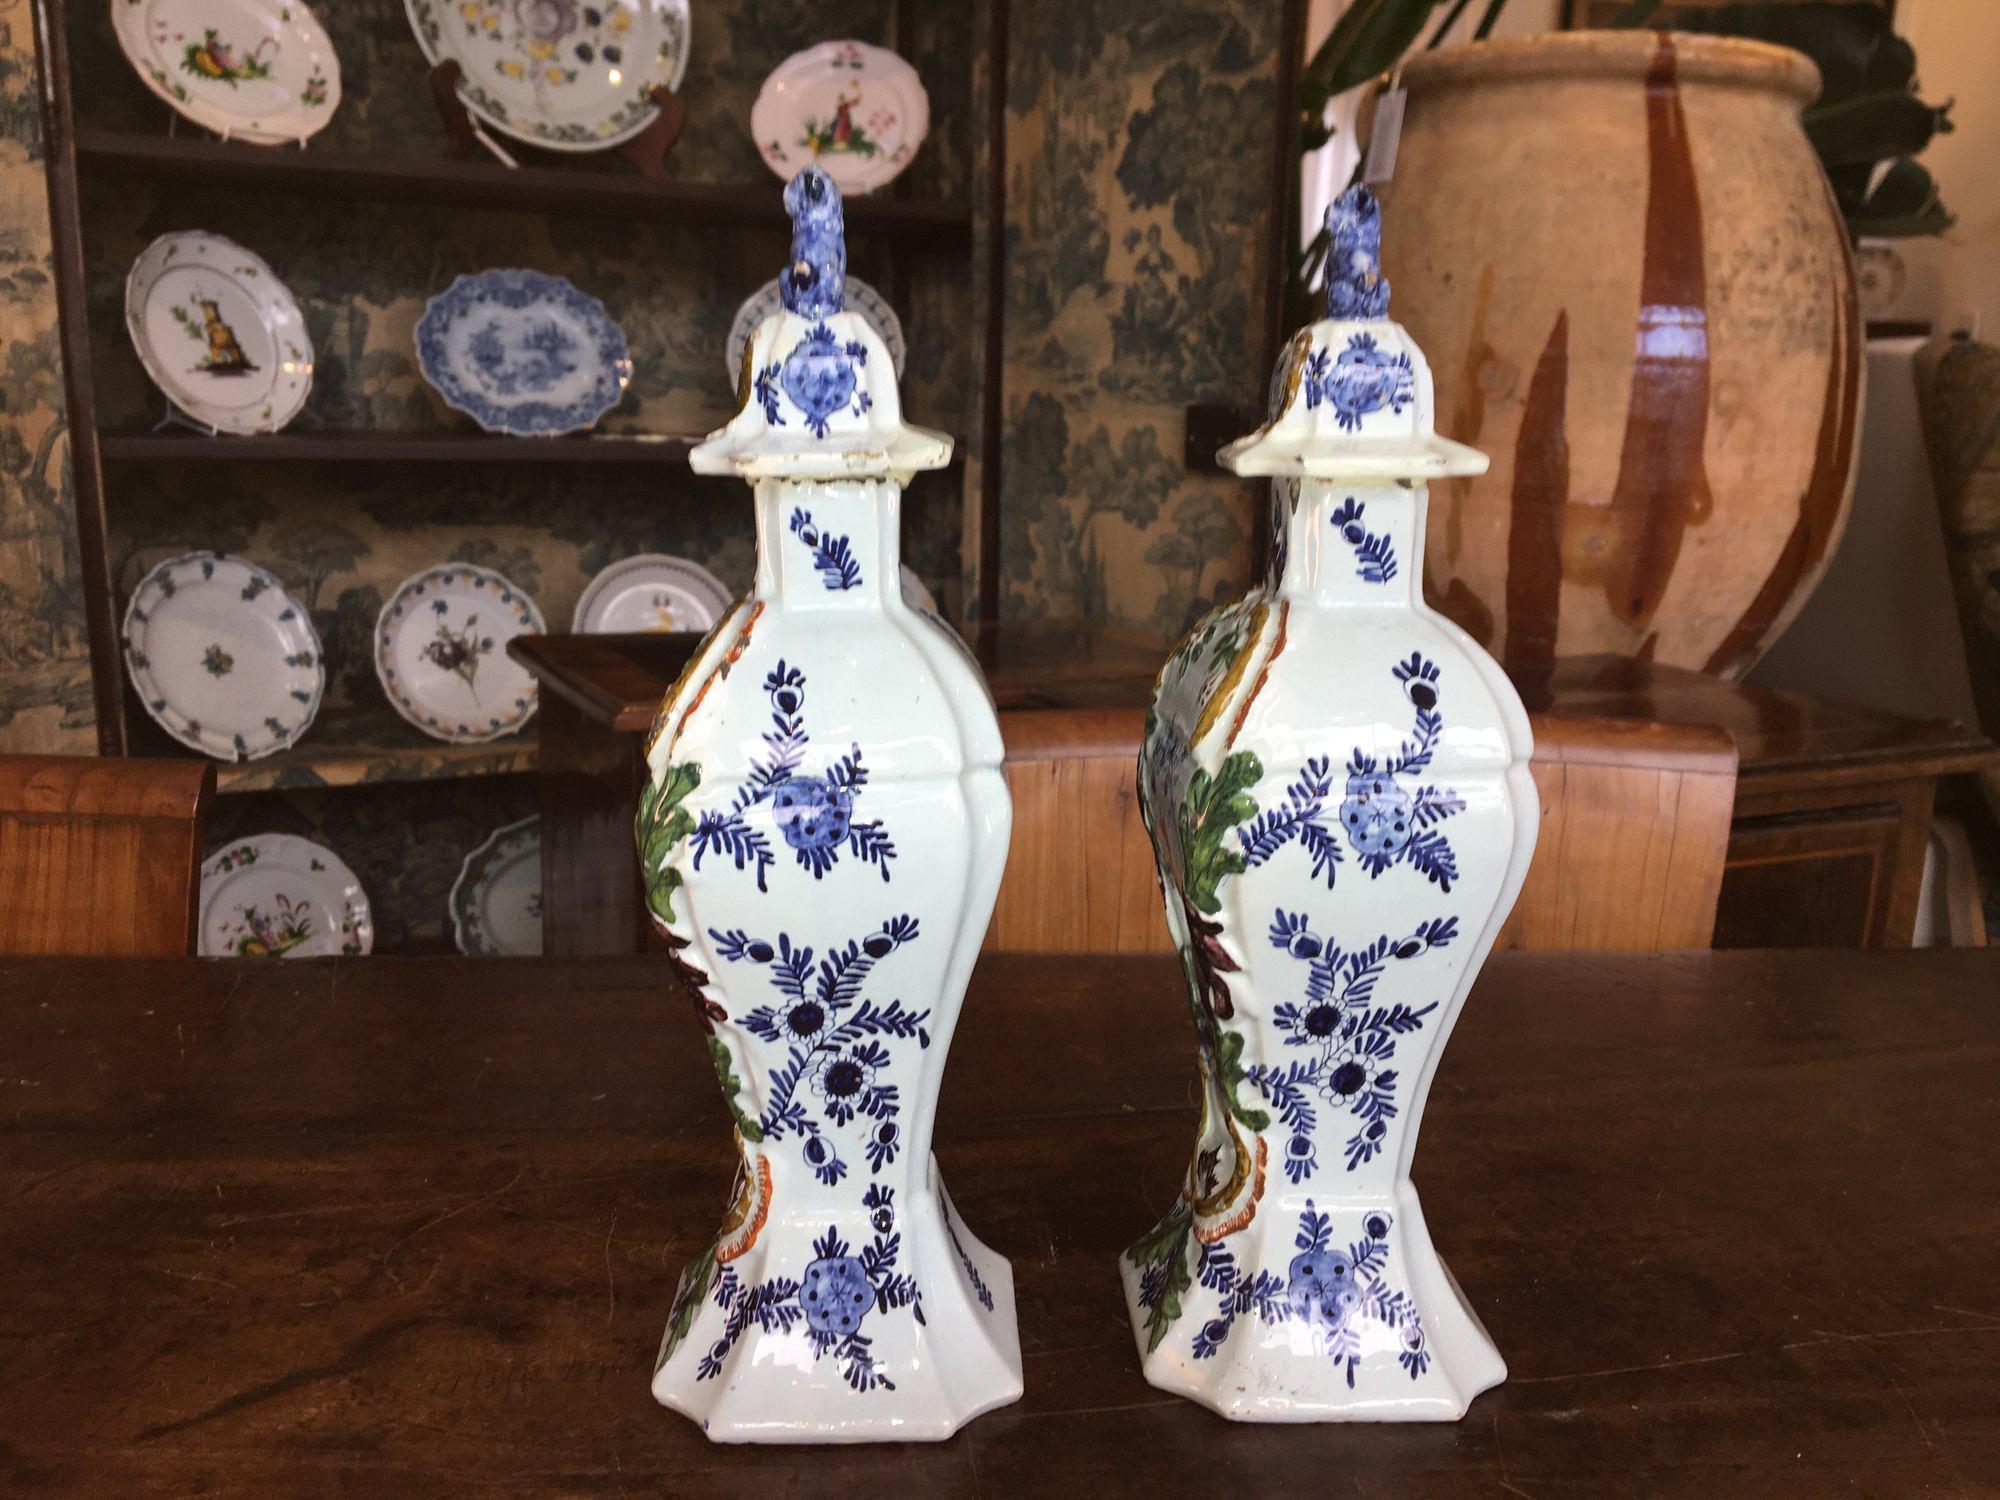 Pair of 18th century delft jars, chinoiserie décor with foo dog lids, some early restoration. In excellent condition. Marked Jacobus Harlees, circa 1770, de Porcelain Fles Factory.